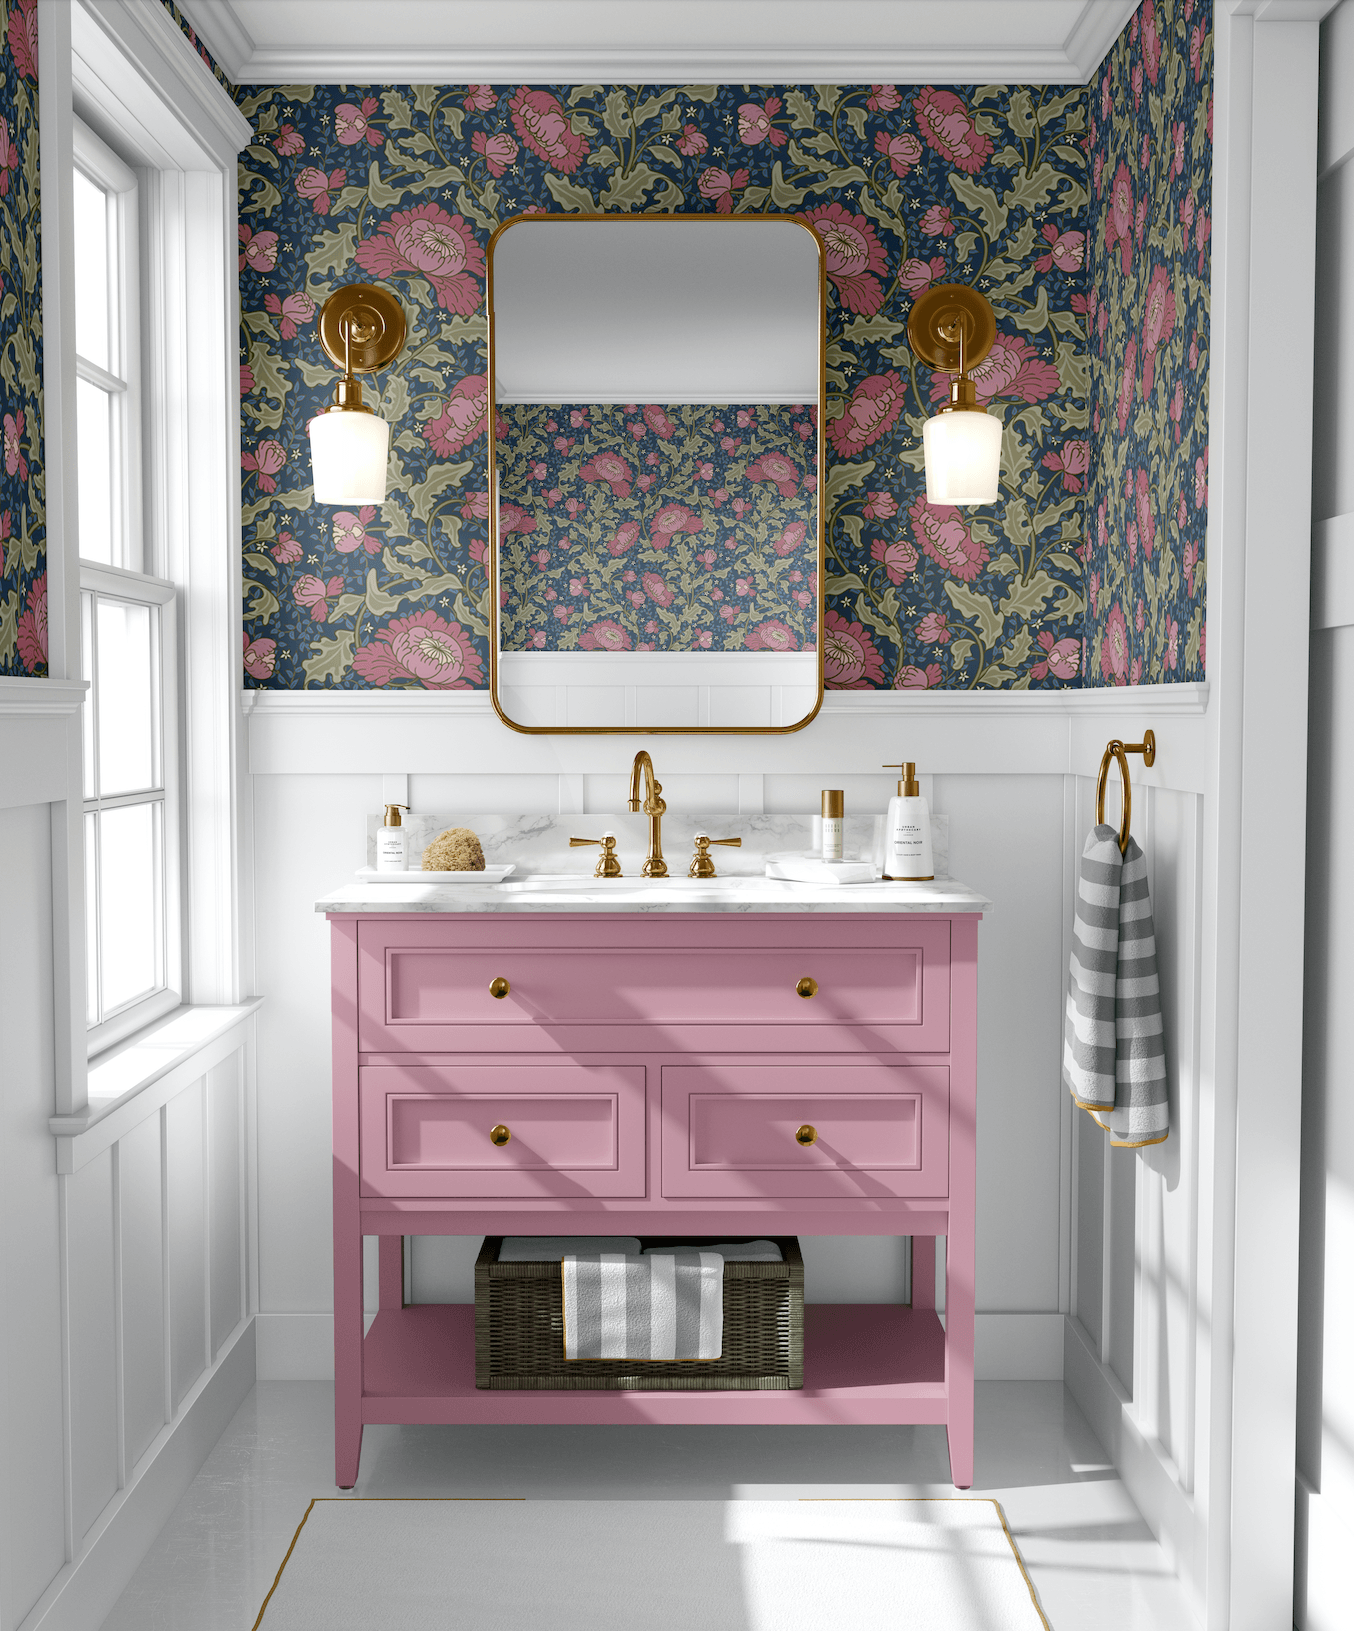 floral wallpaper in bathroom with pink sink vanity and gold mirror with two gold light sconces